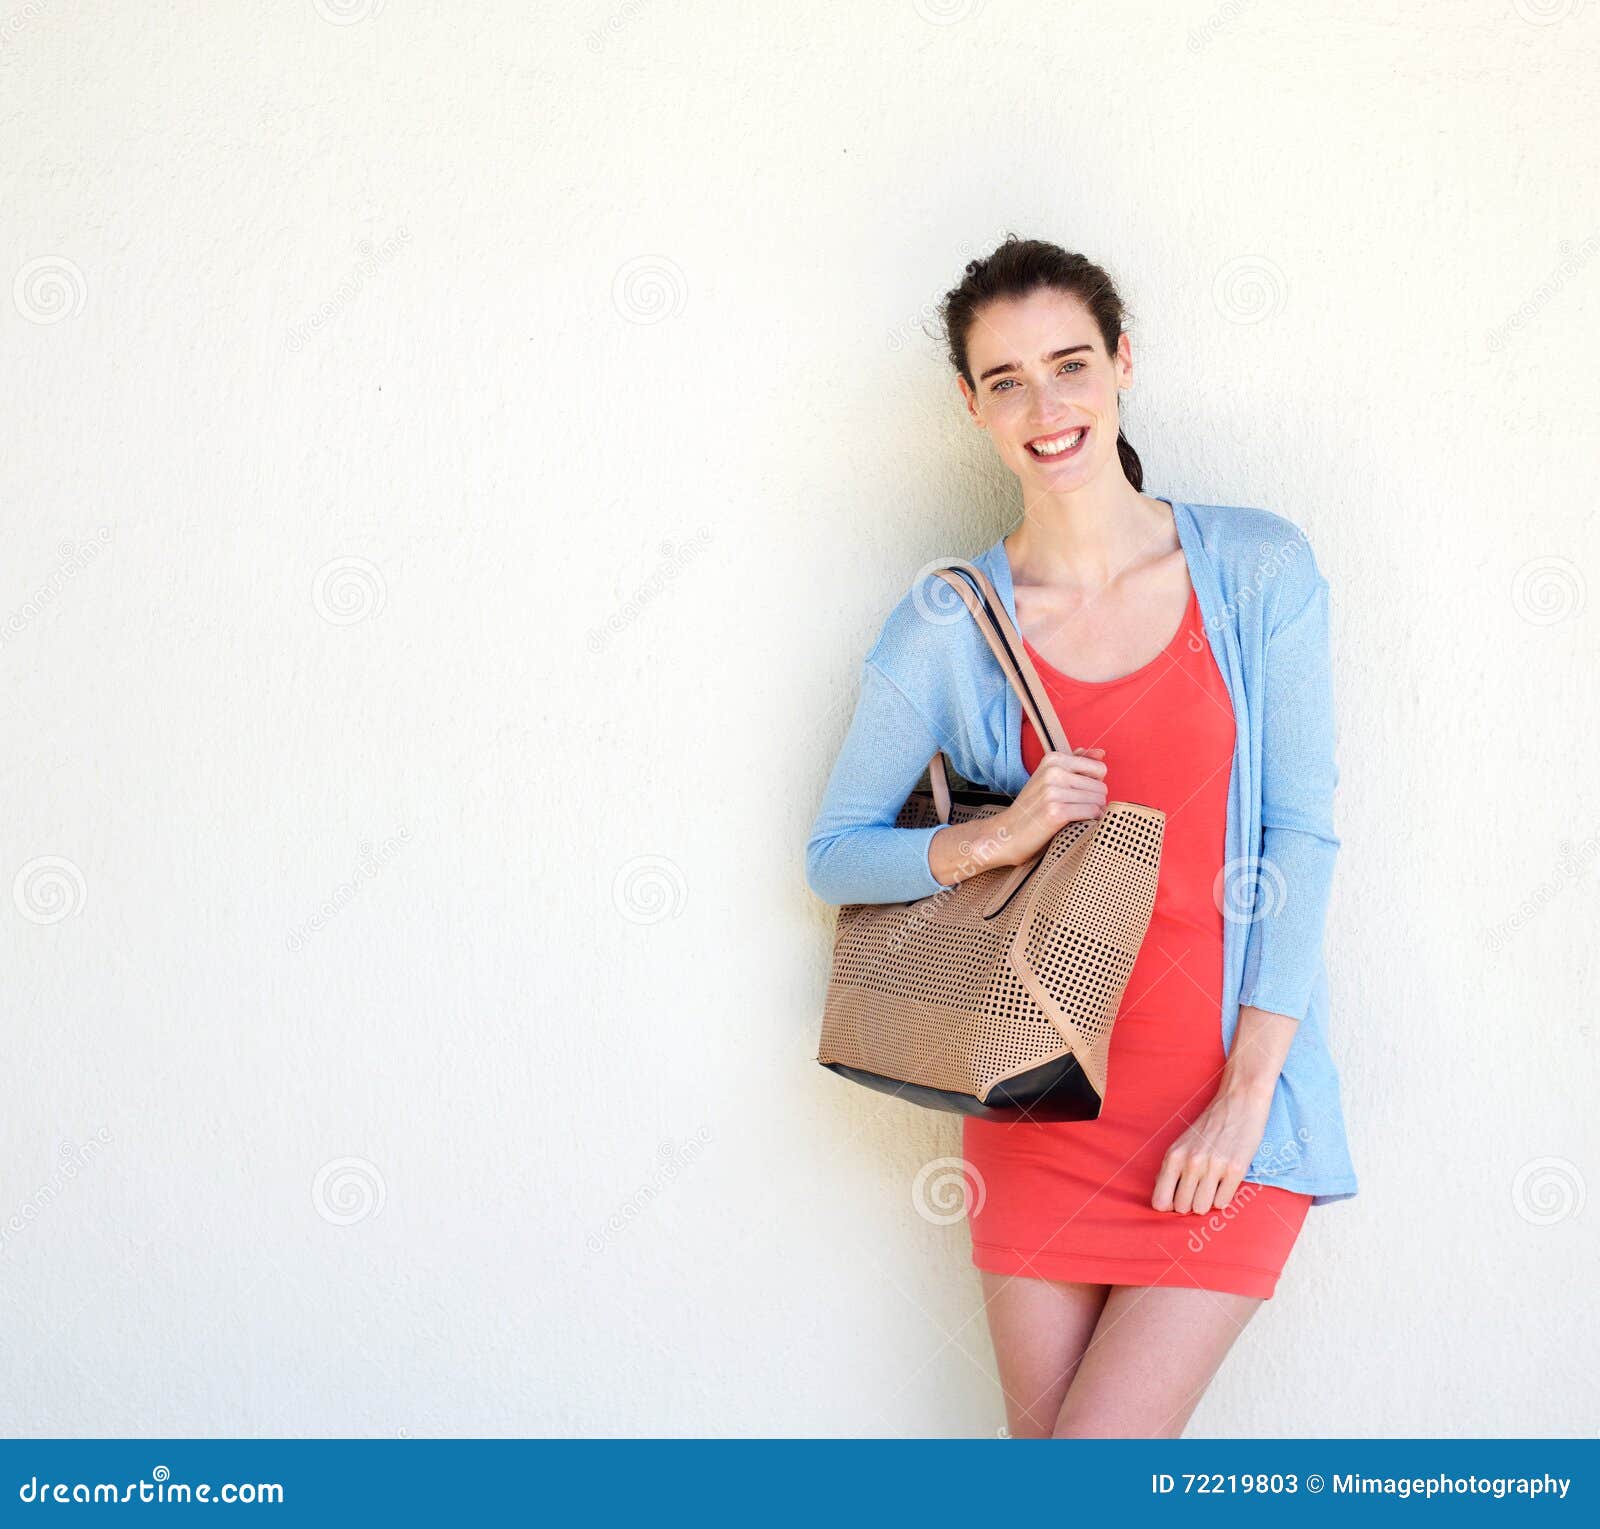 Pretty Young Woman Carrying A Purse And Some Shopping Bags While Visiting A  Shopping Center Stock Photo, Picture and Royalty Free Image. Image 51571974.